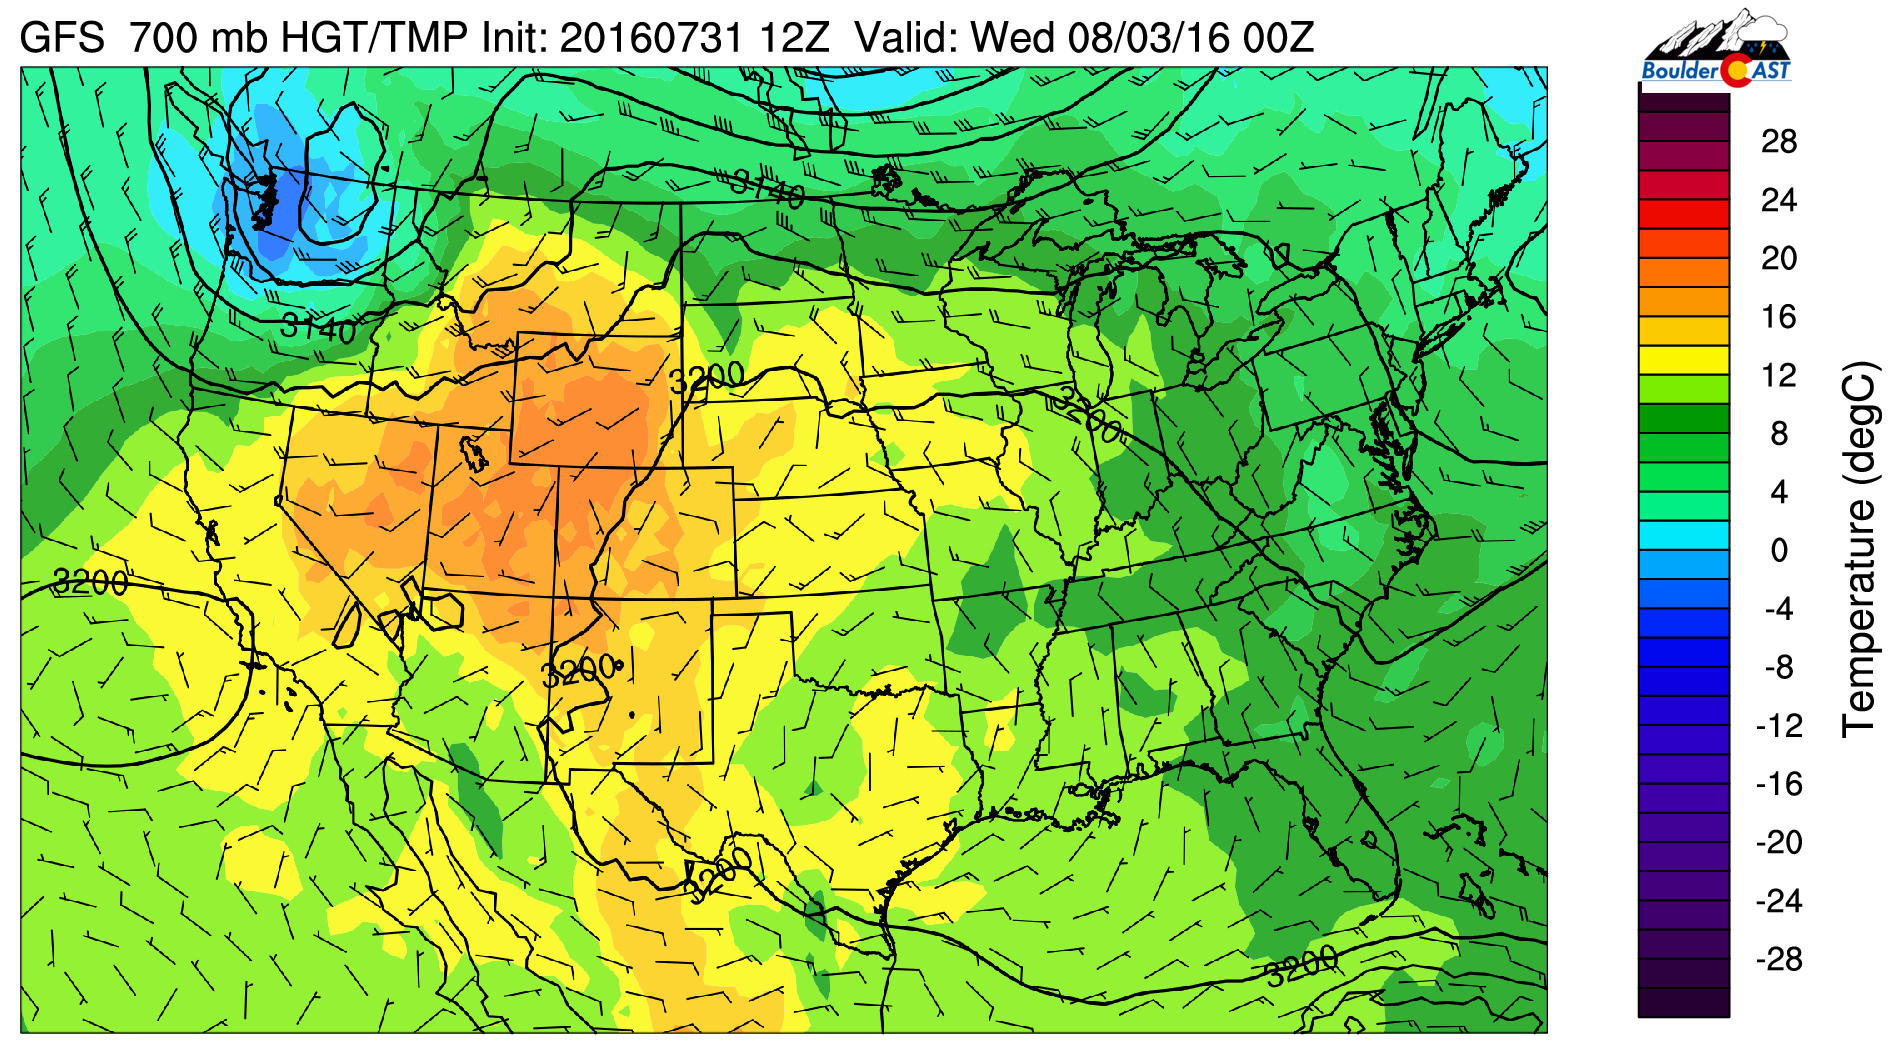 GFS 700 mb temperature for Tuesday over the U.S.